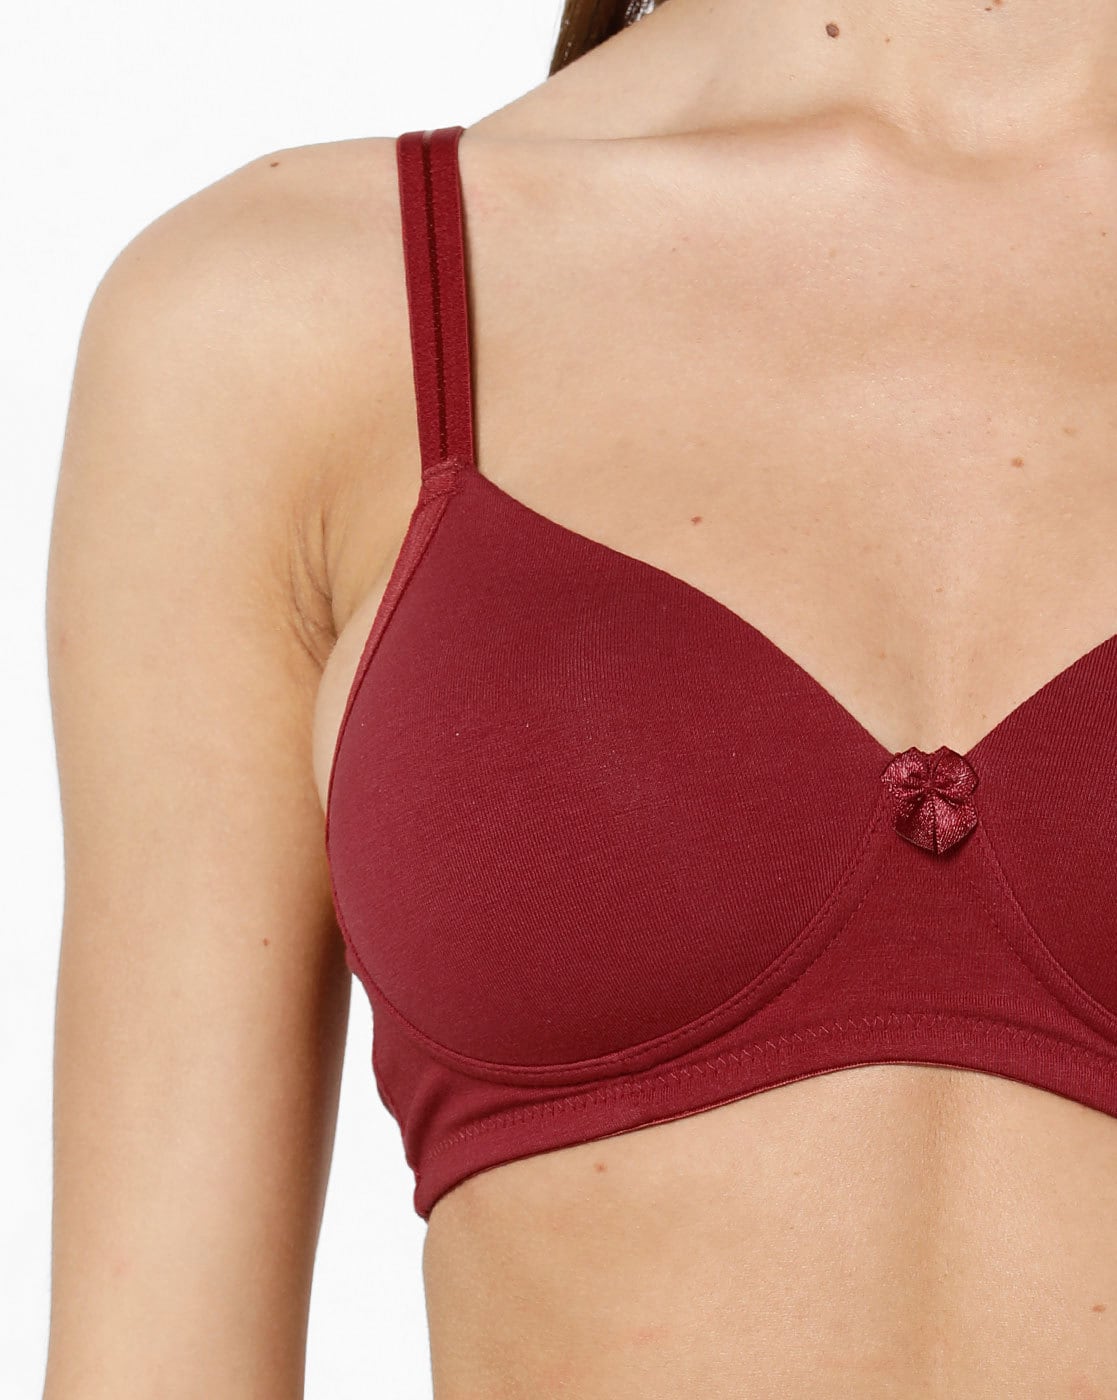 Buy Red Bras for Women by HANES Online